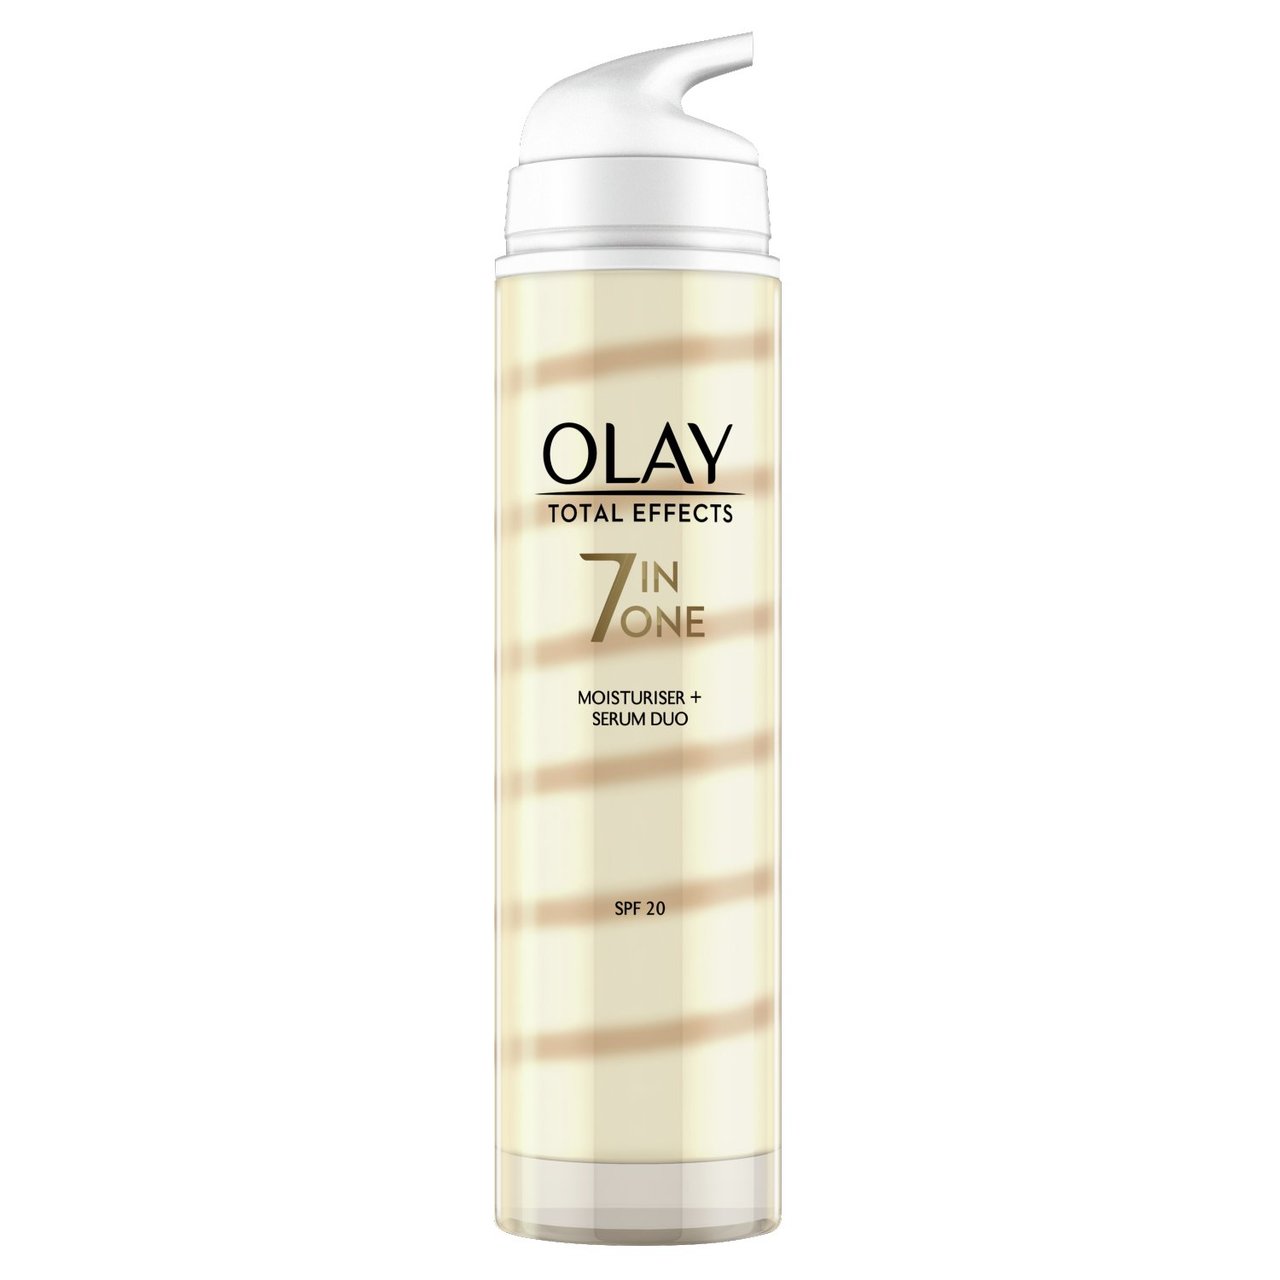 Olay Total Effects Moisturiser And Olay Serum Duo